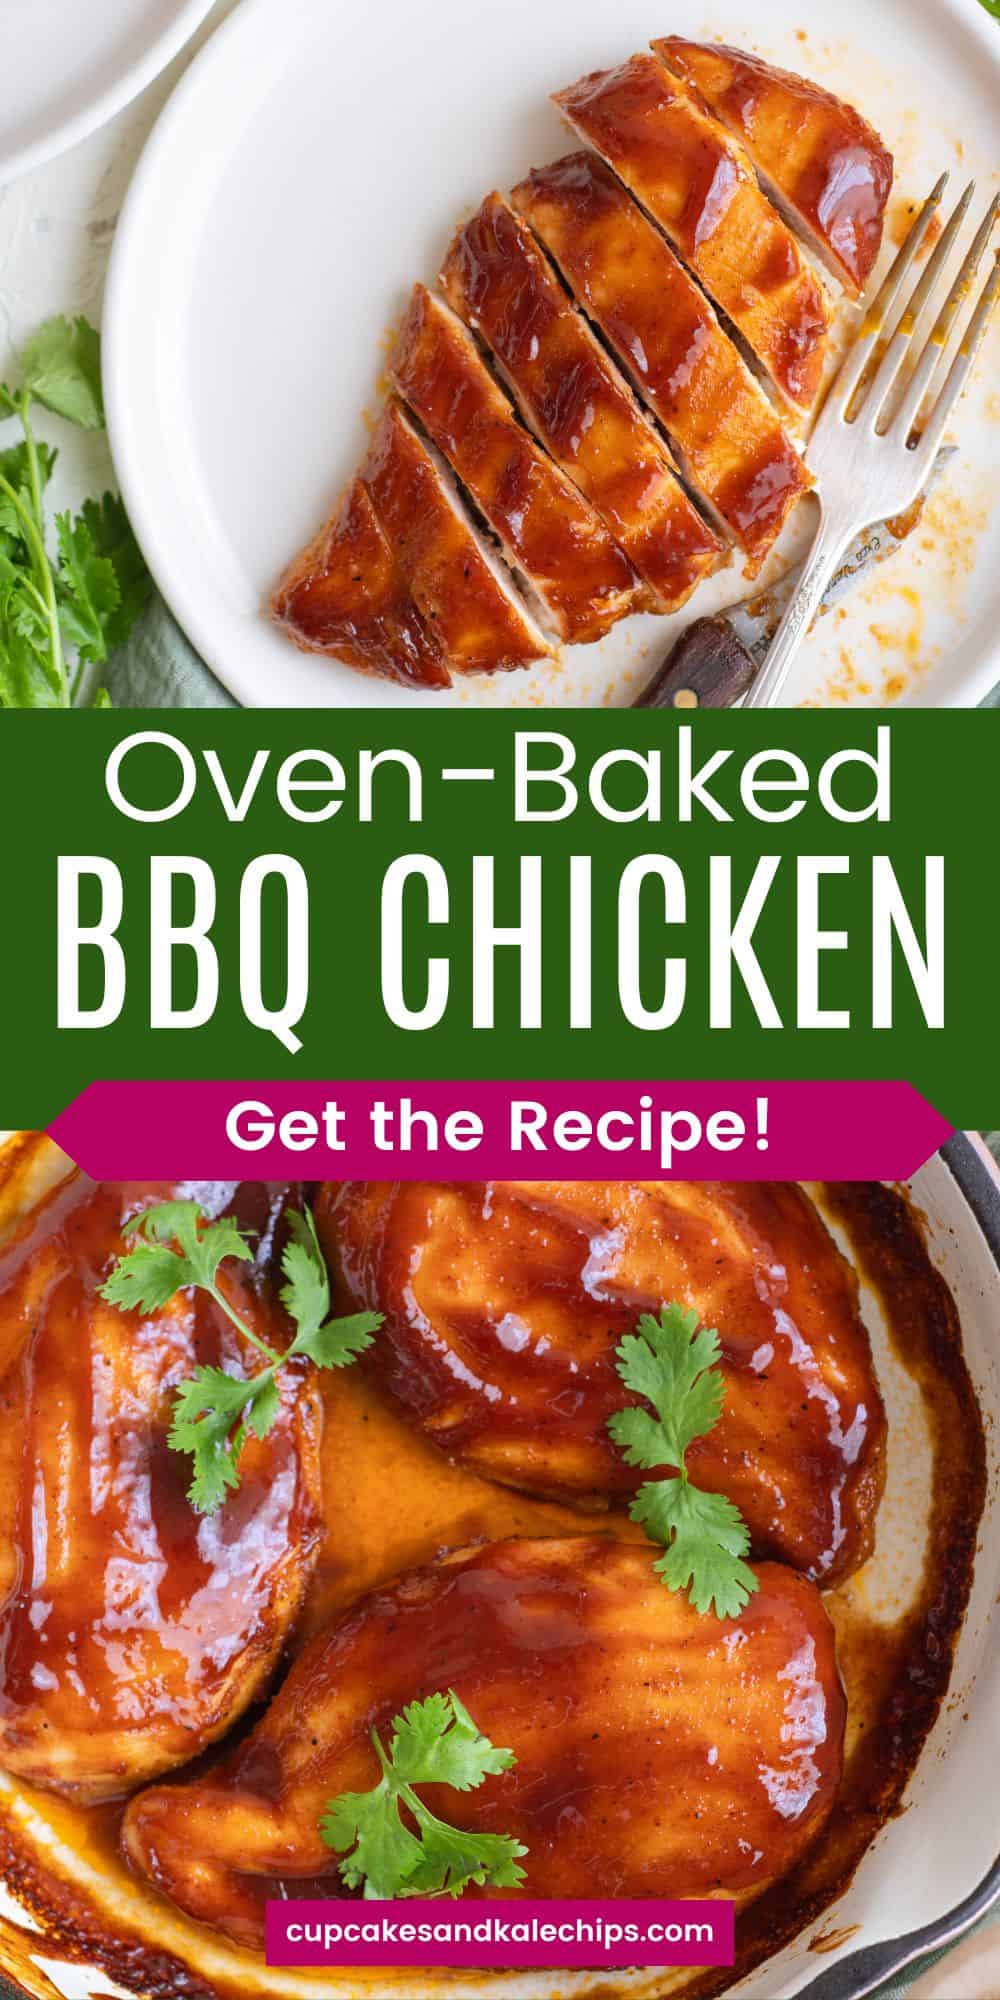 Oven-Baked BBQ Chicken Breasts | Cupcakes & Kale Chips